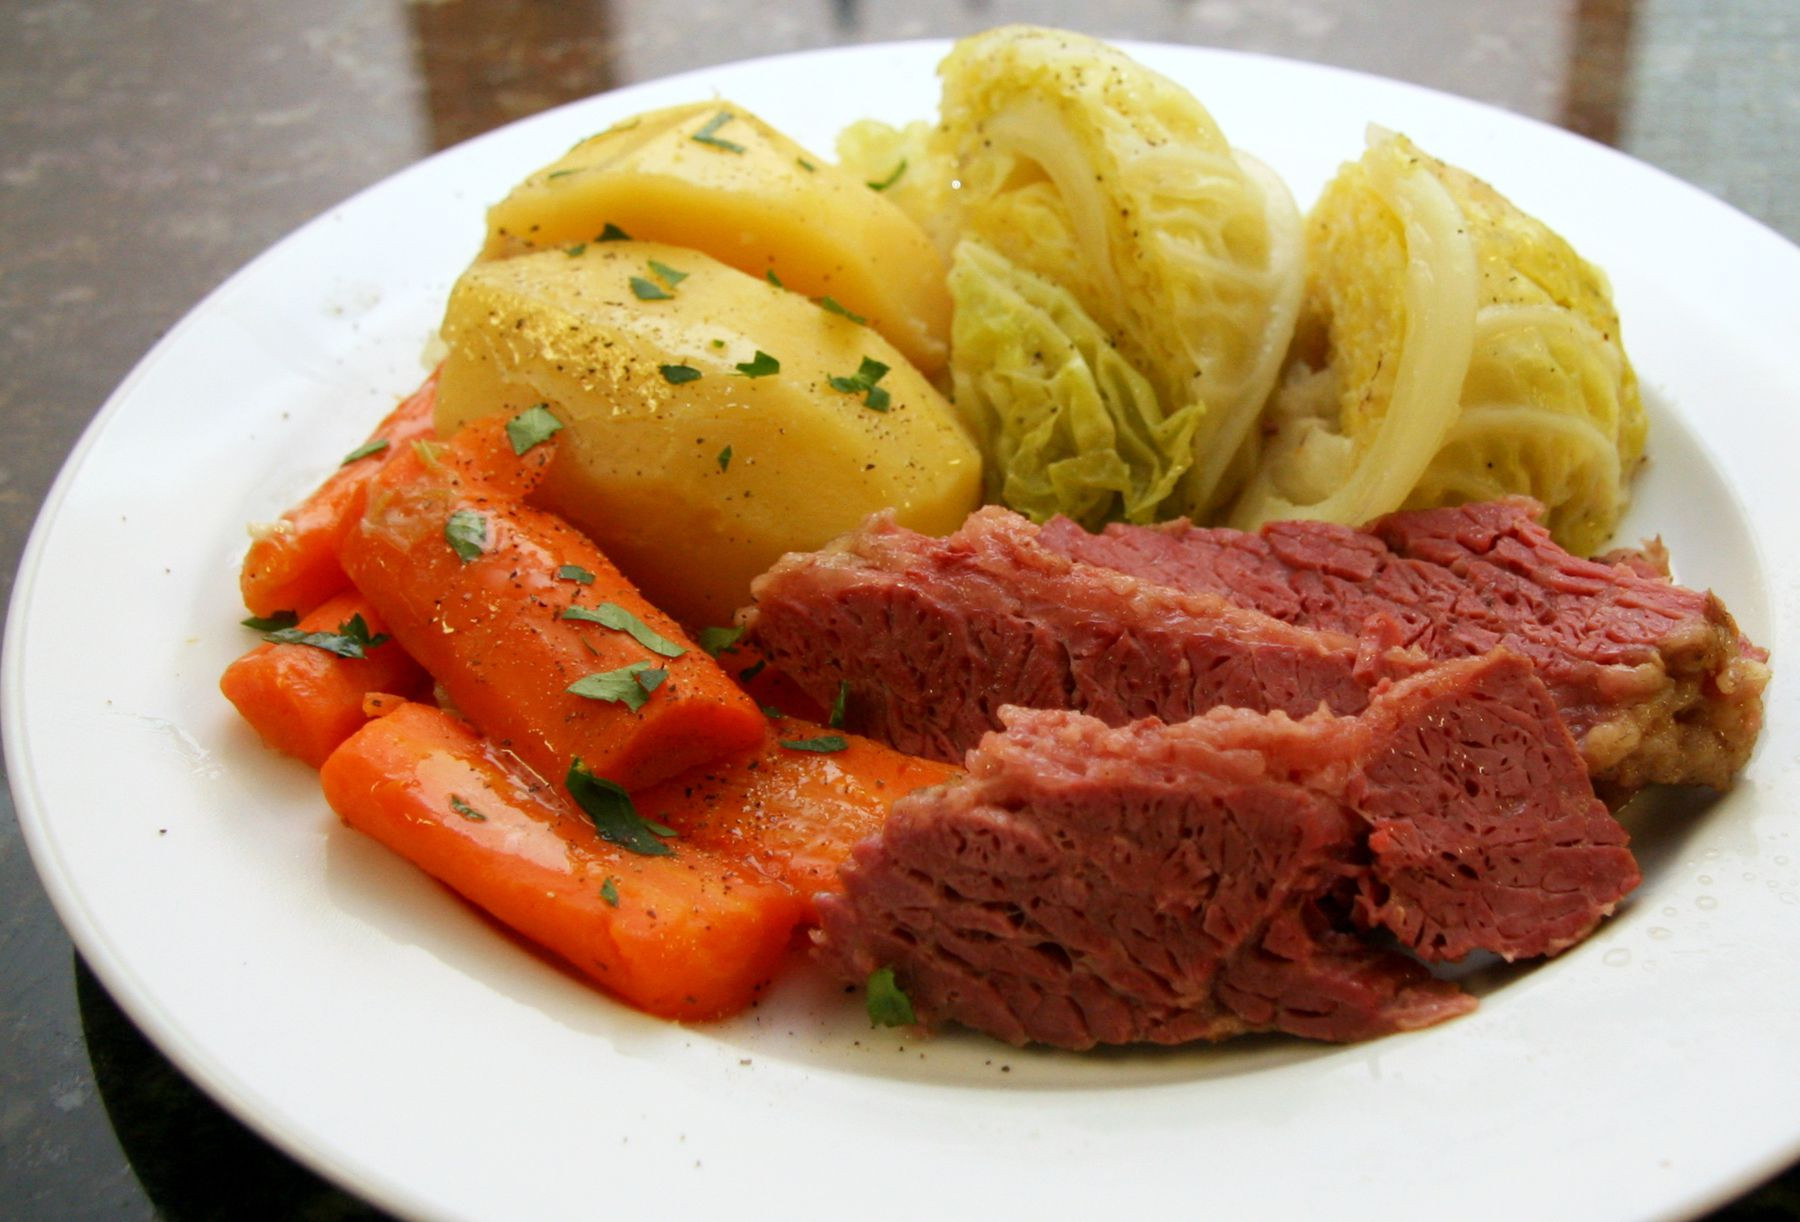 Corned Beef And Cabbage Recipe Crock Pot
 Slow Cooker Corned Beef and Cabbage Recipe